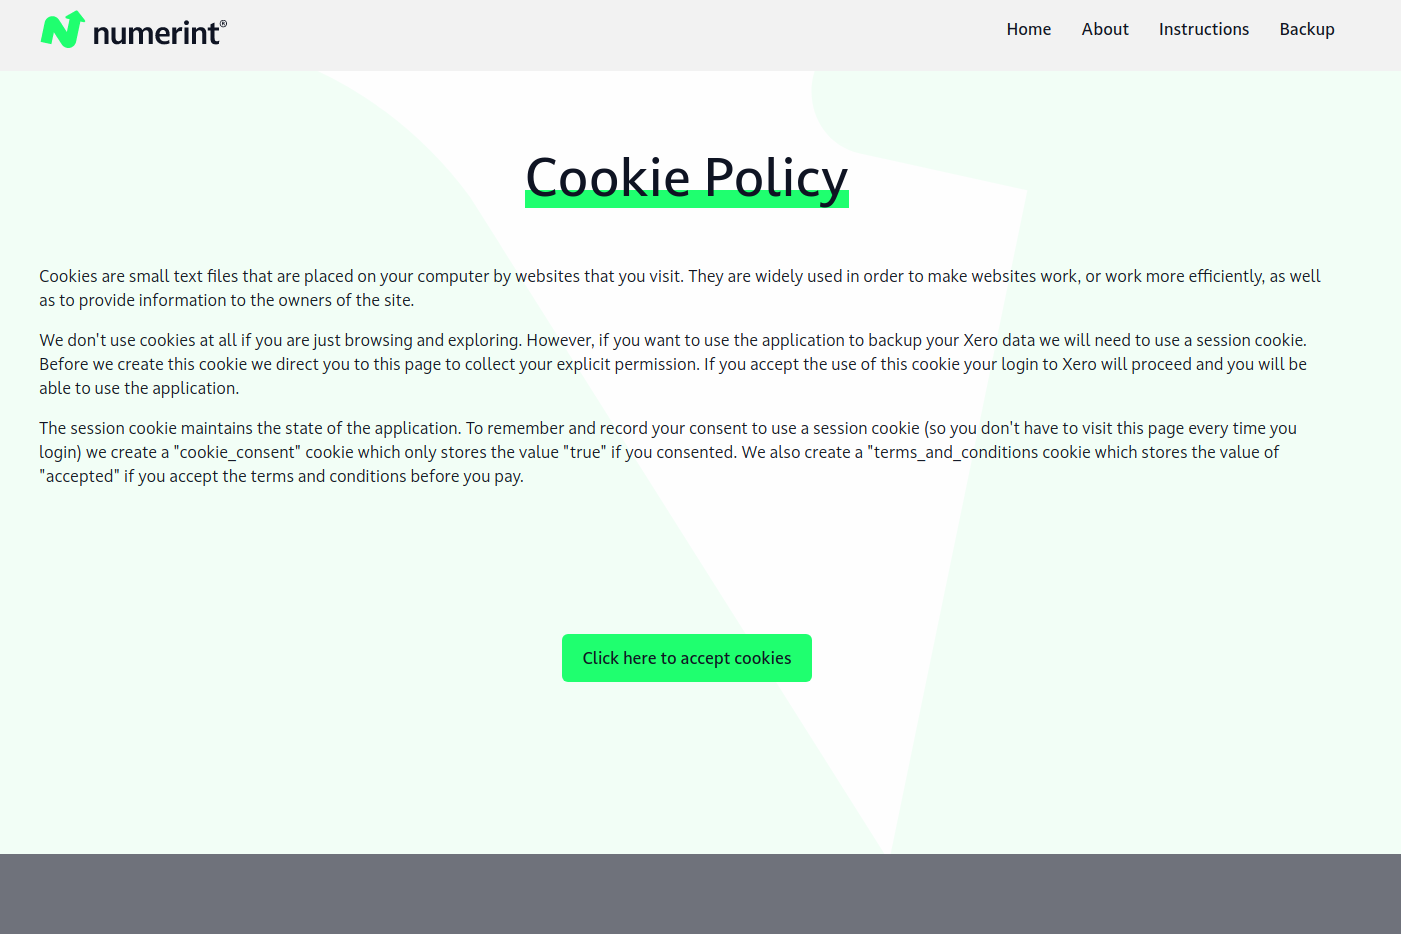 Instruction Step 2: Accept cookie policy